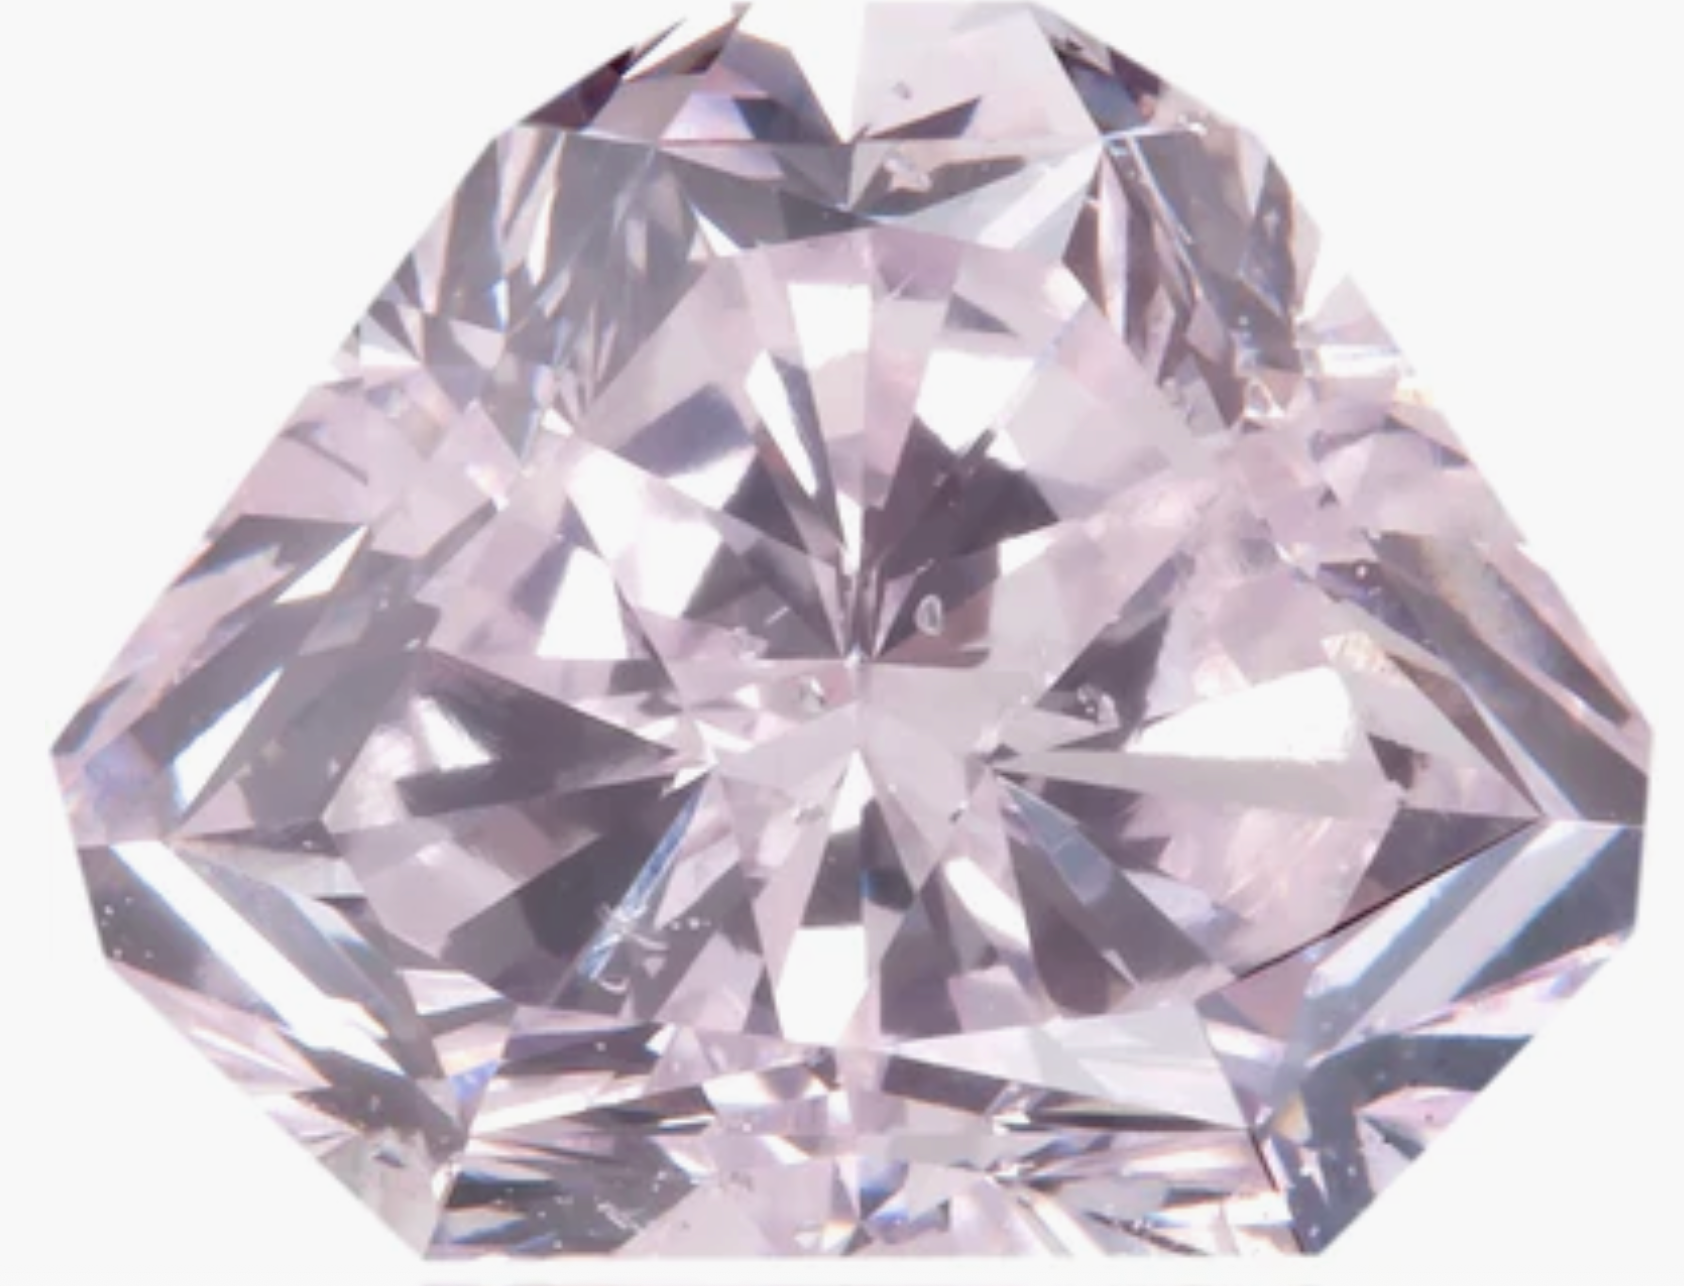 Natural Purple diamond available at Langerman Diamonds with GIA certificate.